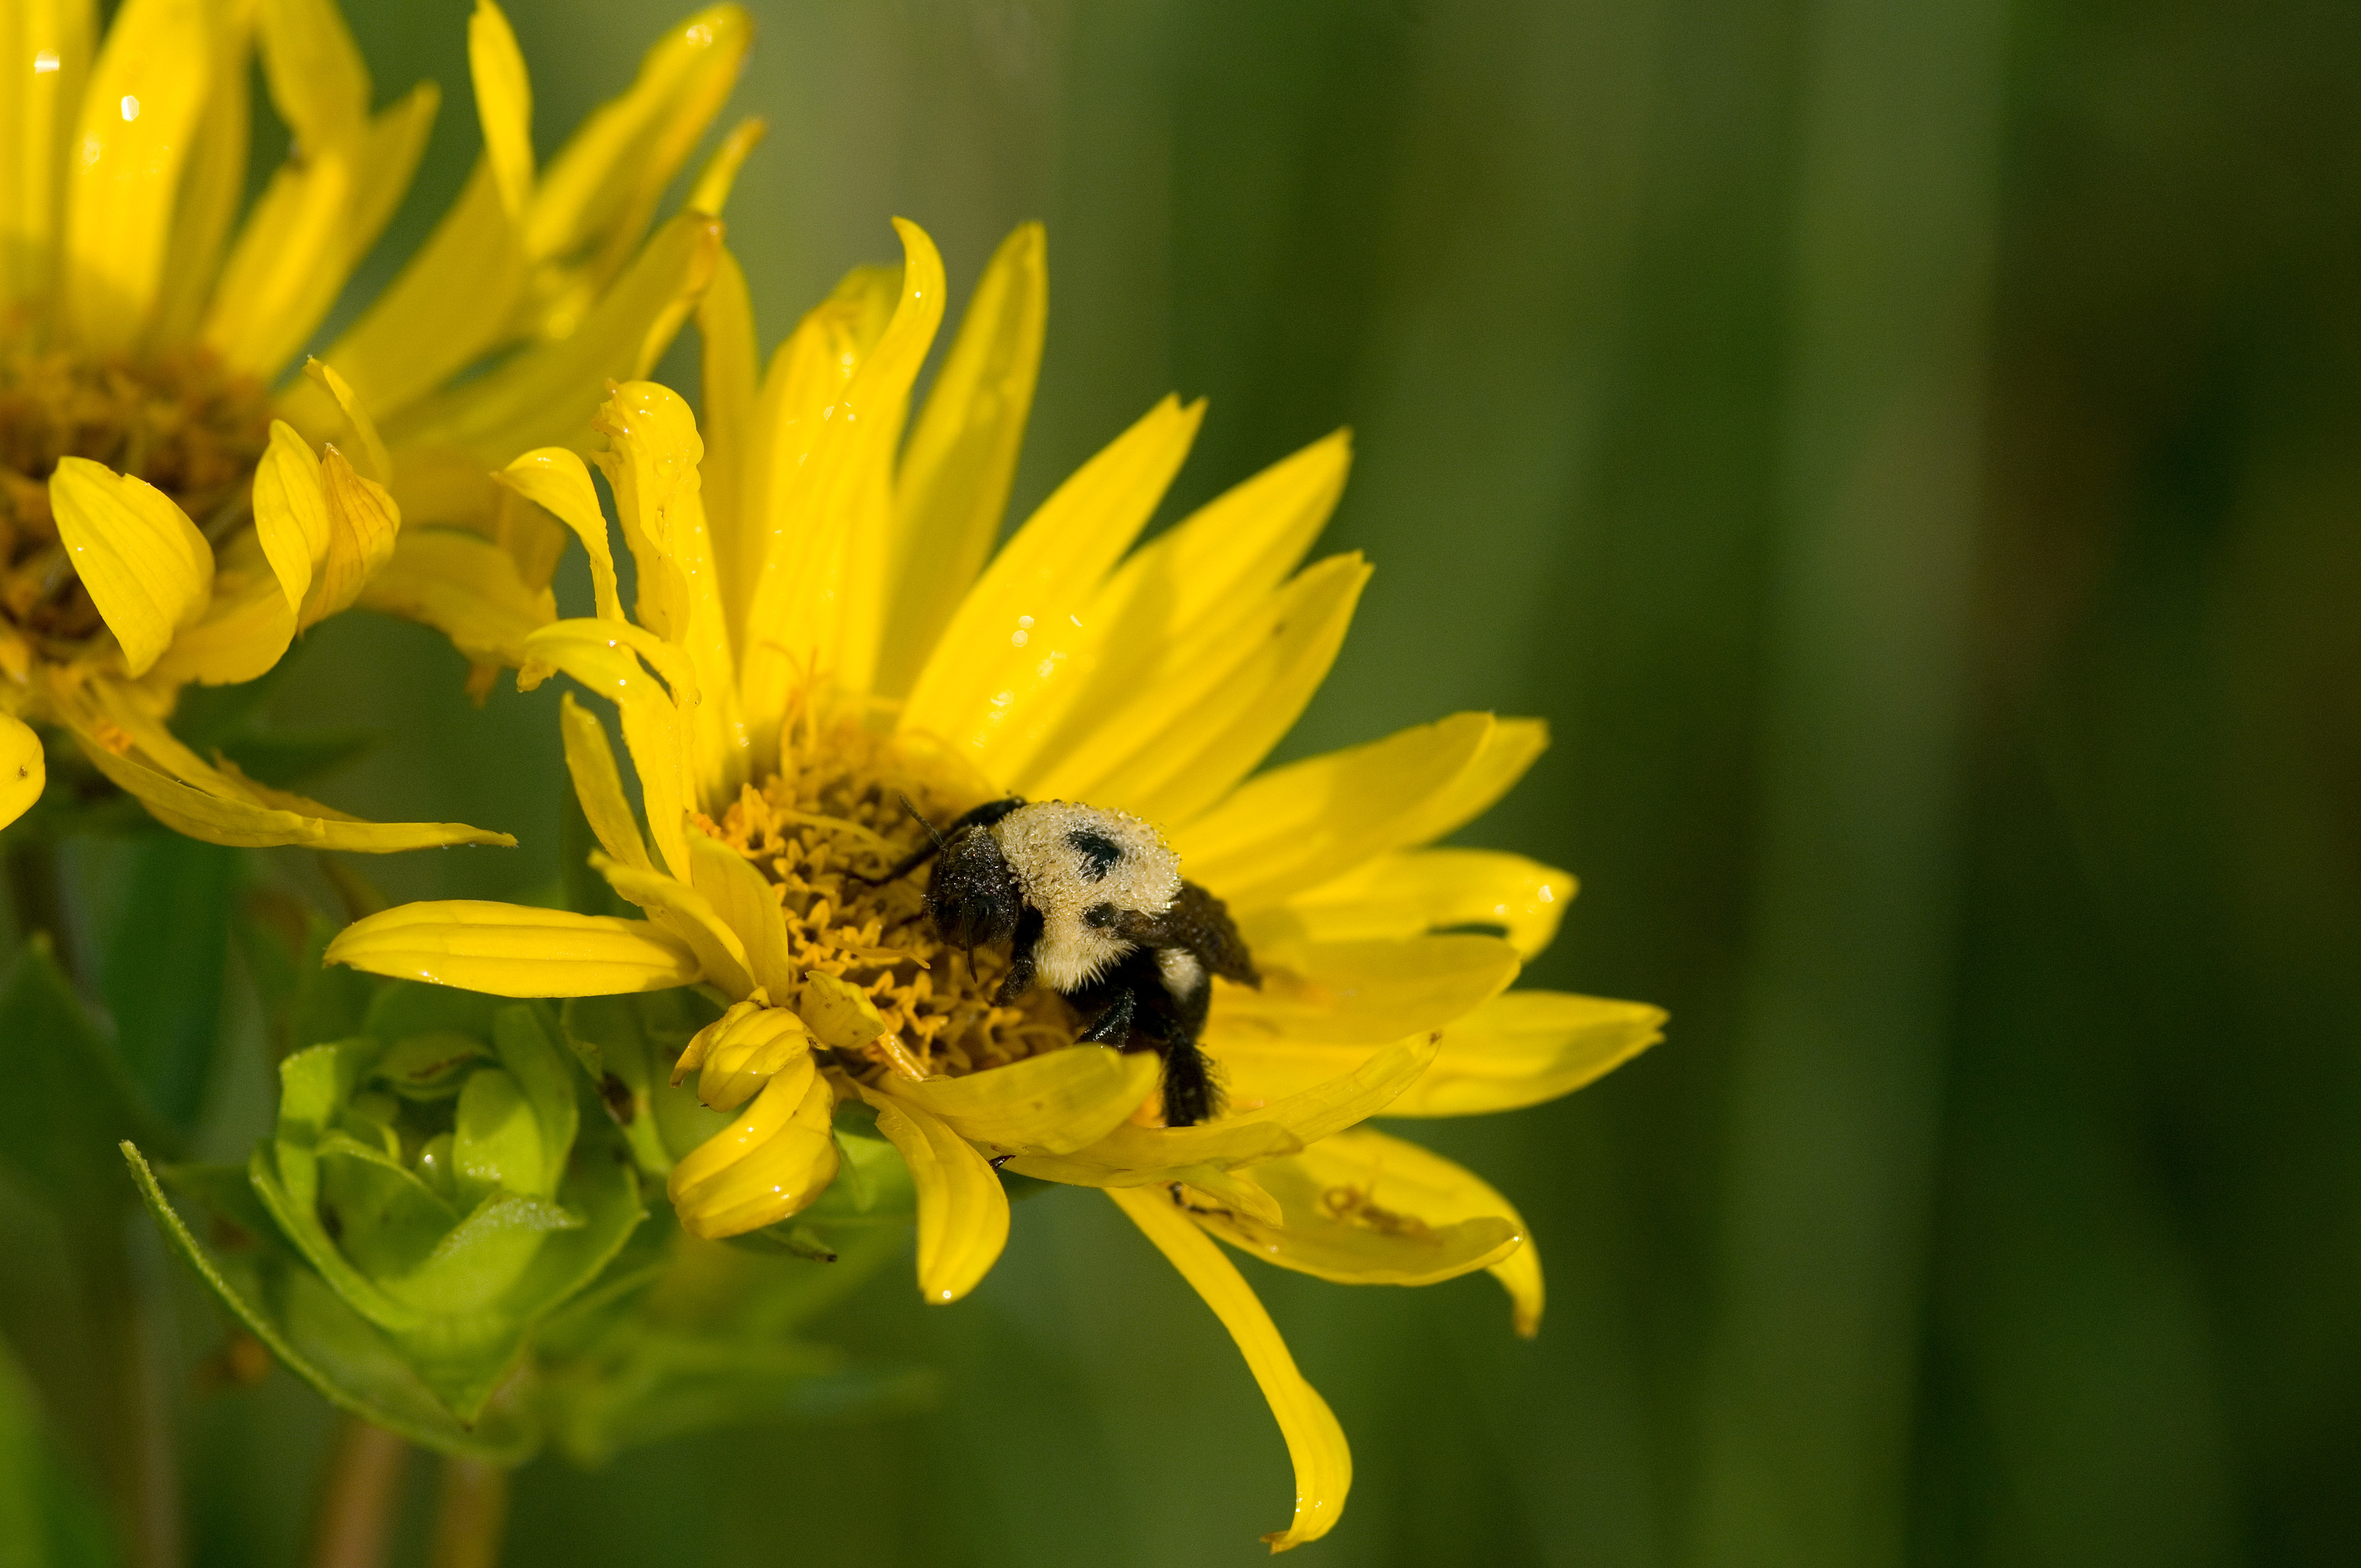 A bee collects pollen in the center of a yellow petaled flower called Siliphium or Rosinweed.